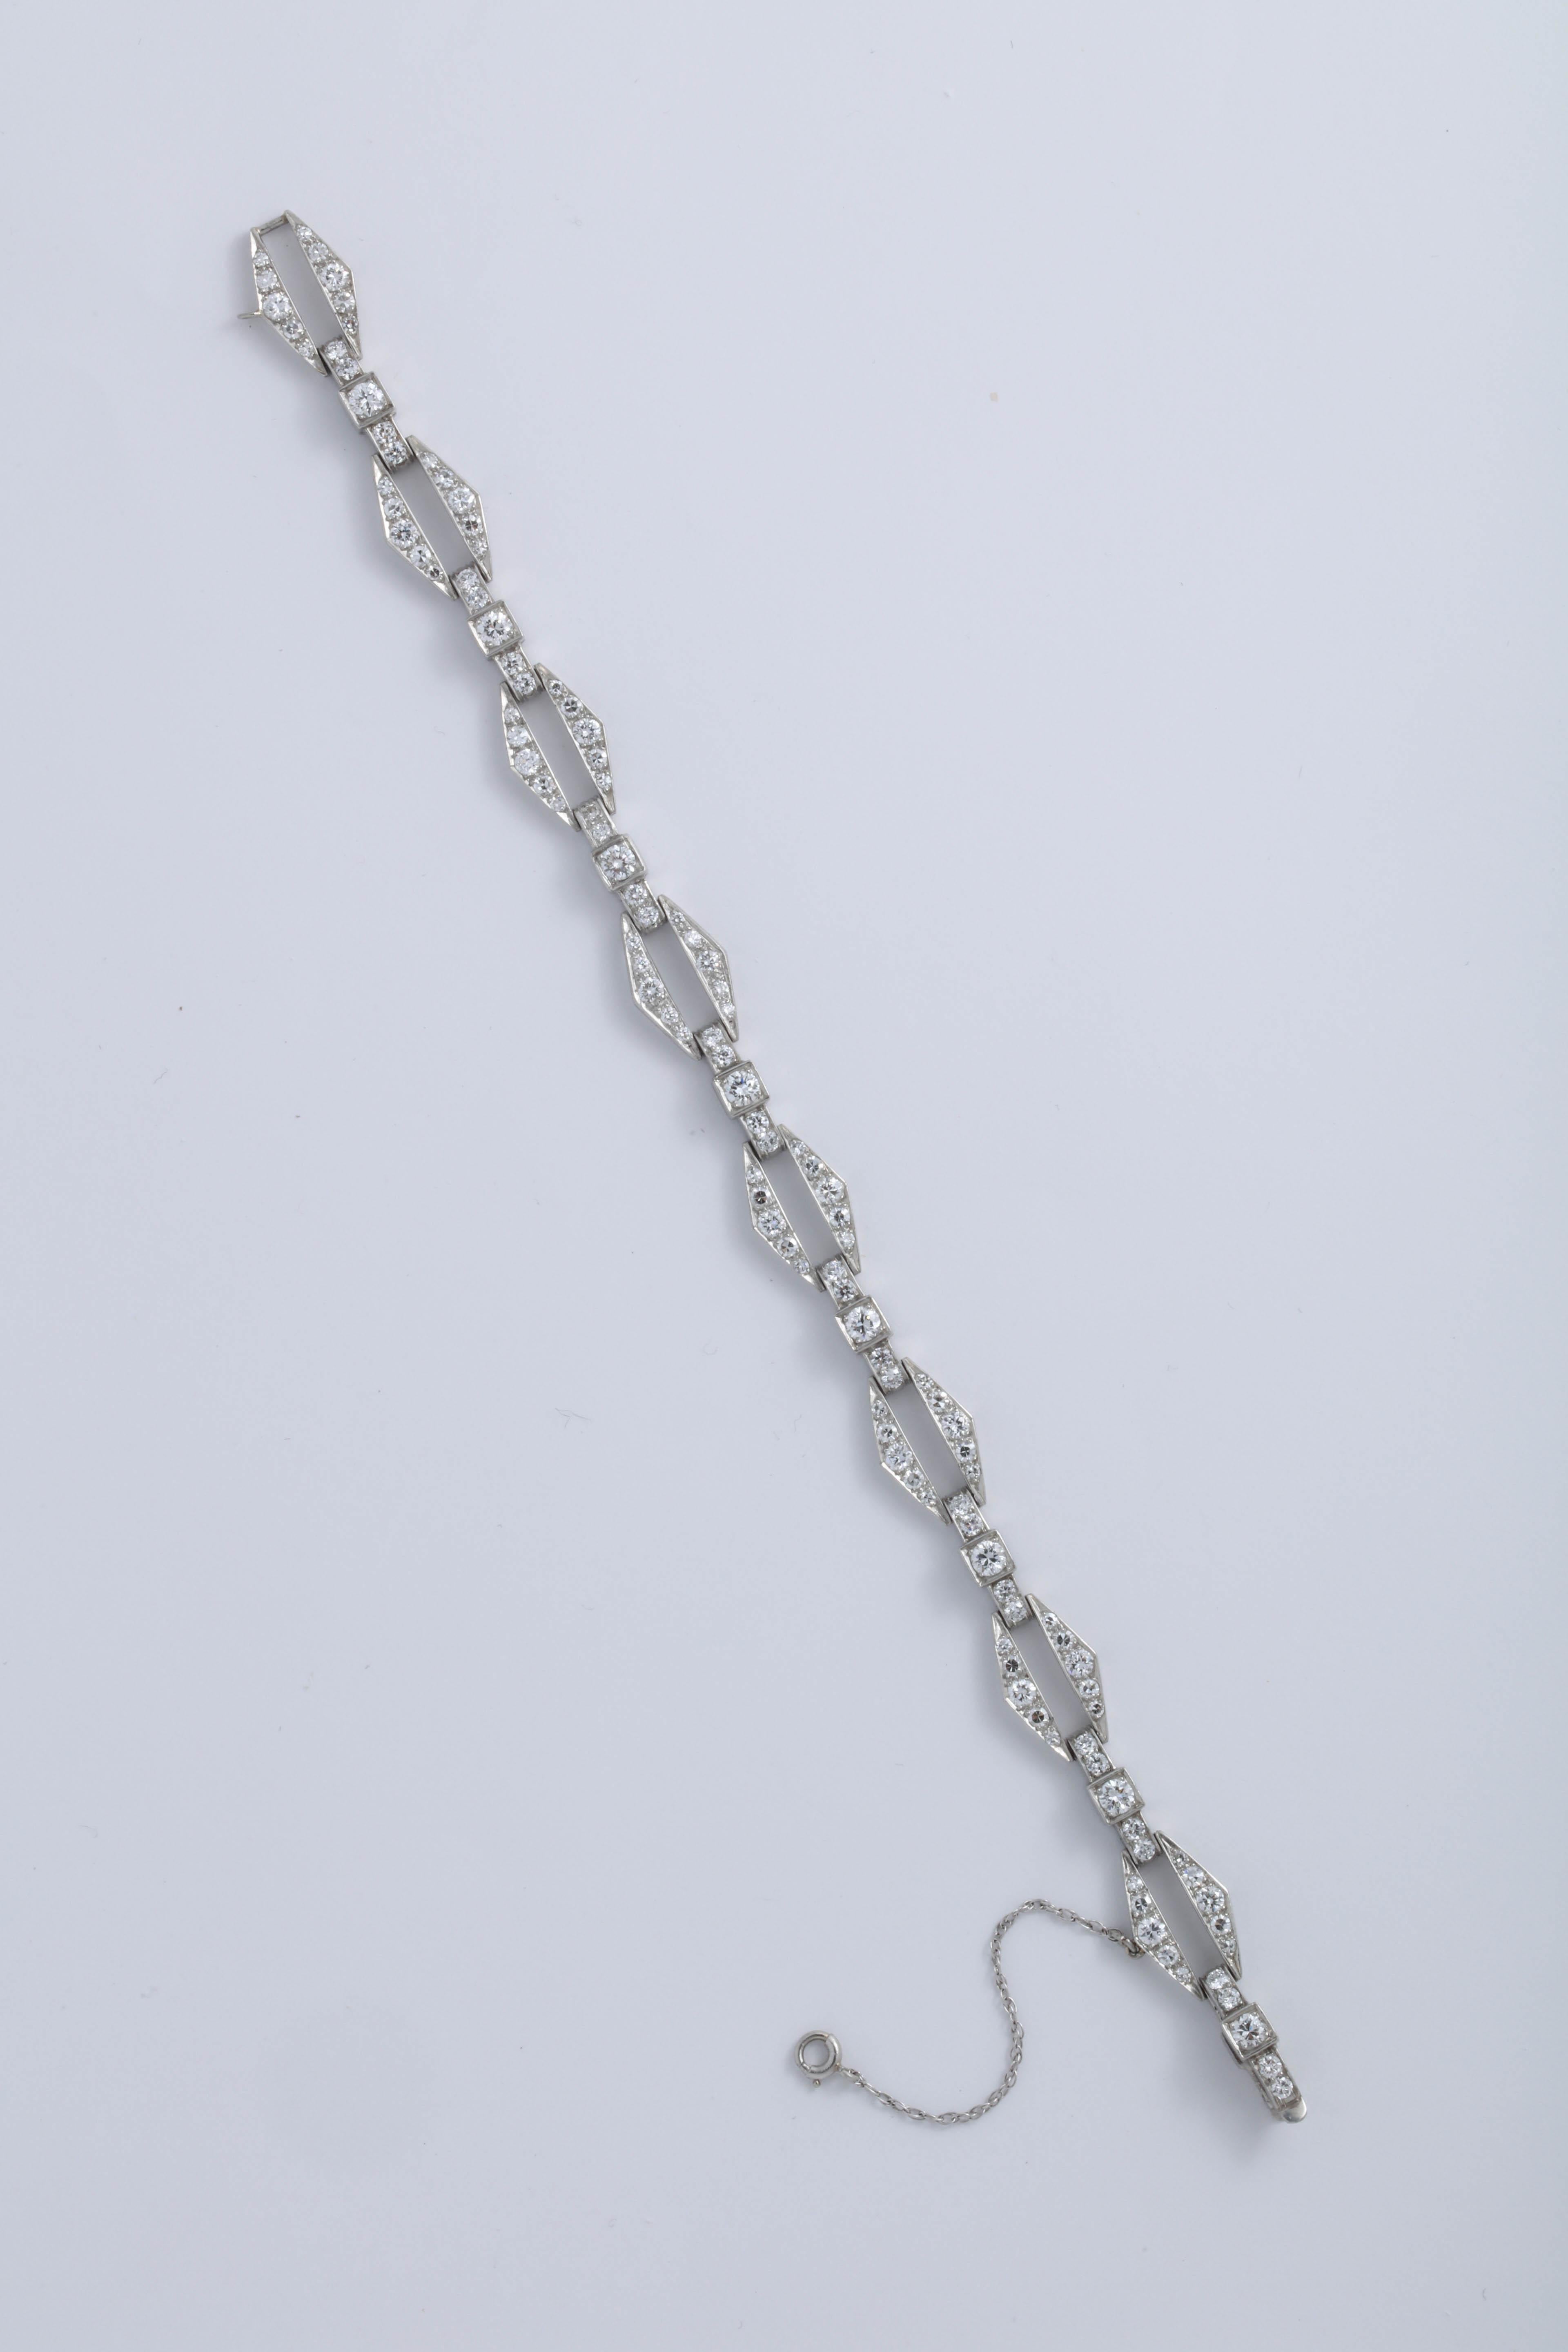 1920s diamond bracelet with approximately 3.5ctw. Set with brilliant and single cut diamonds in platinum. 